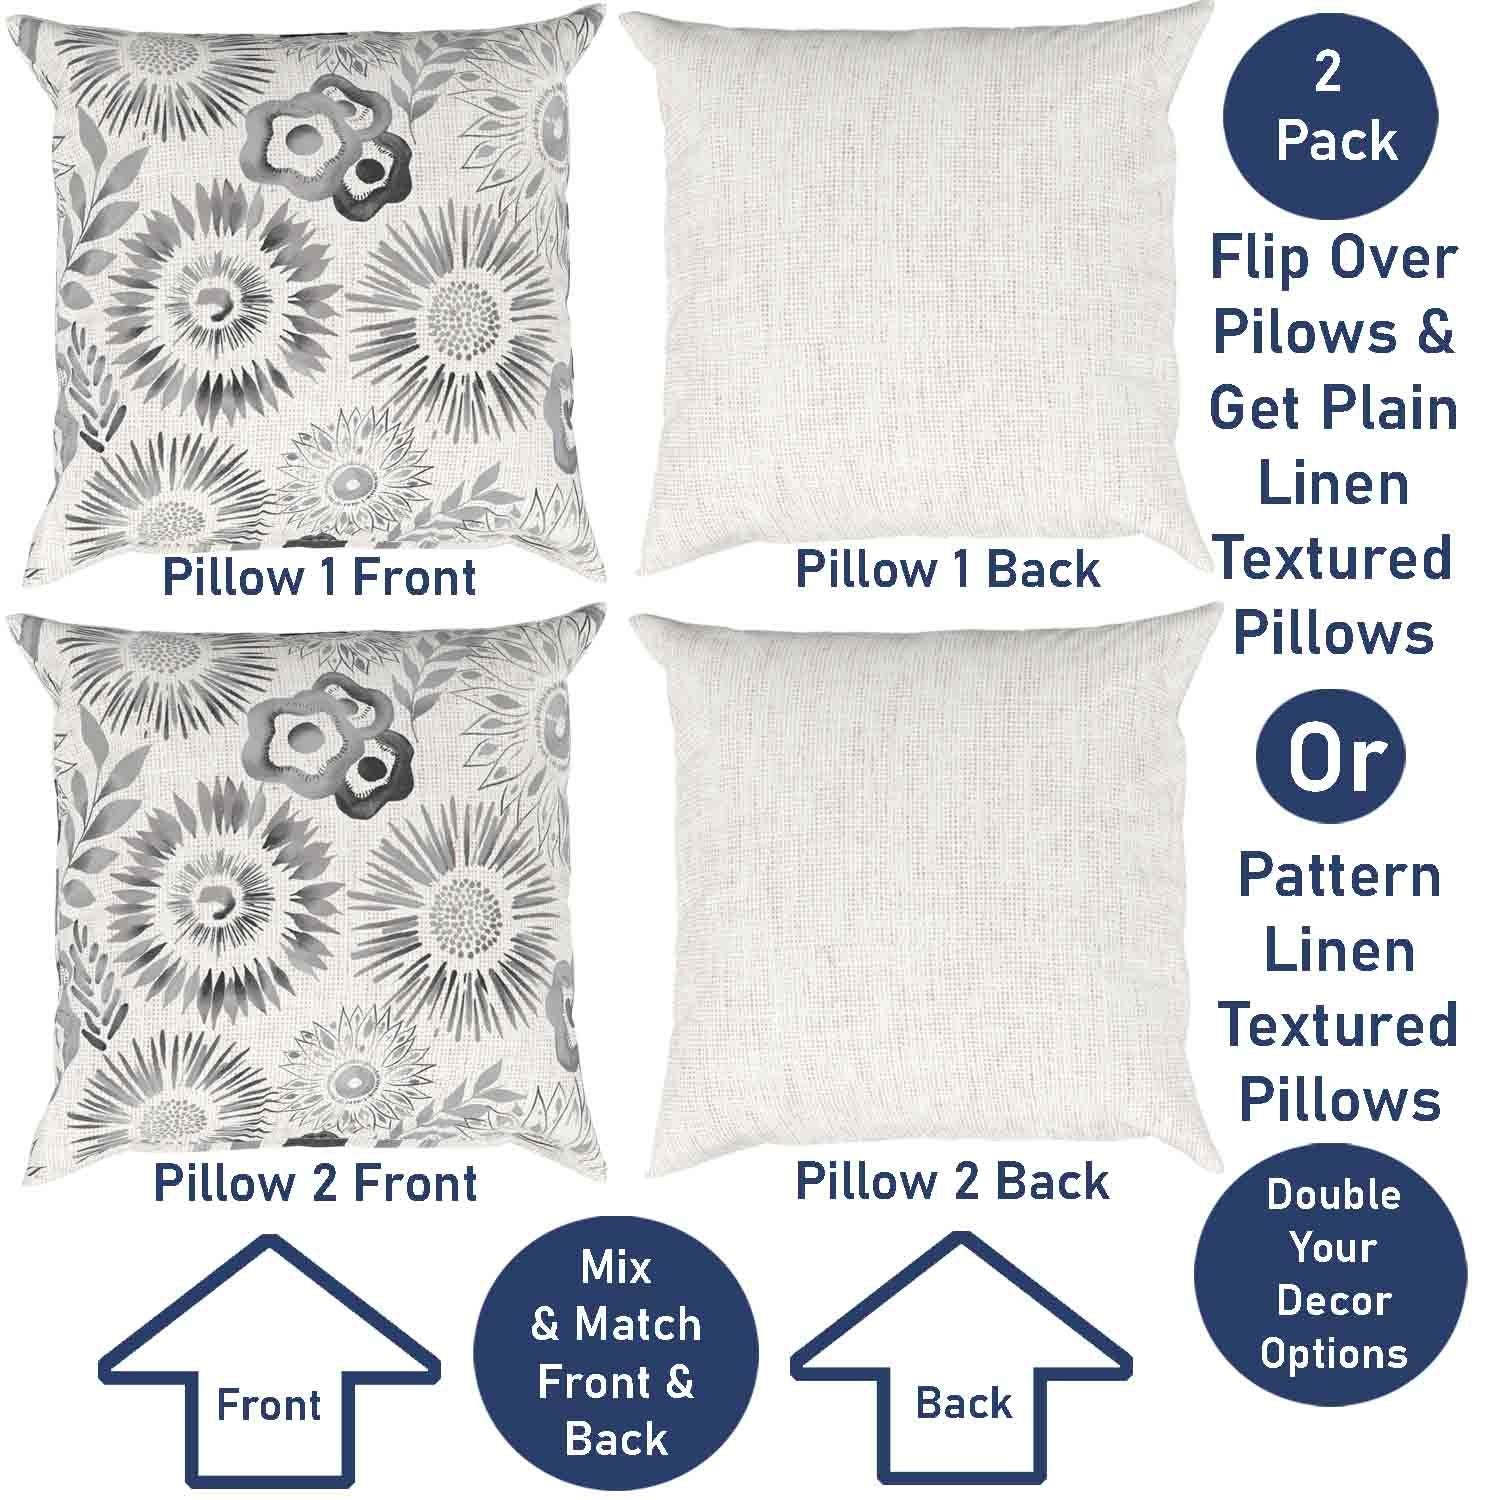 Ray & Iva Plaid Painterly & Watercolor Sunflower Pillow Cover Set